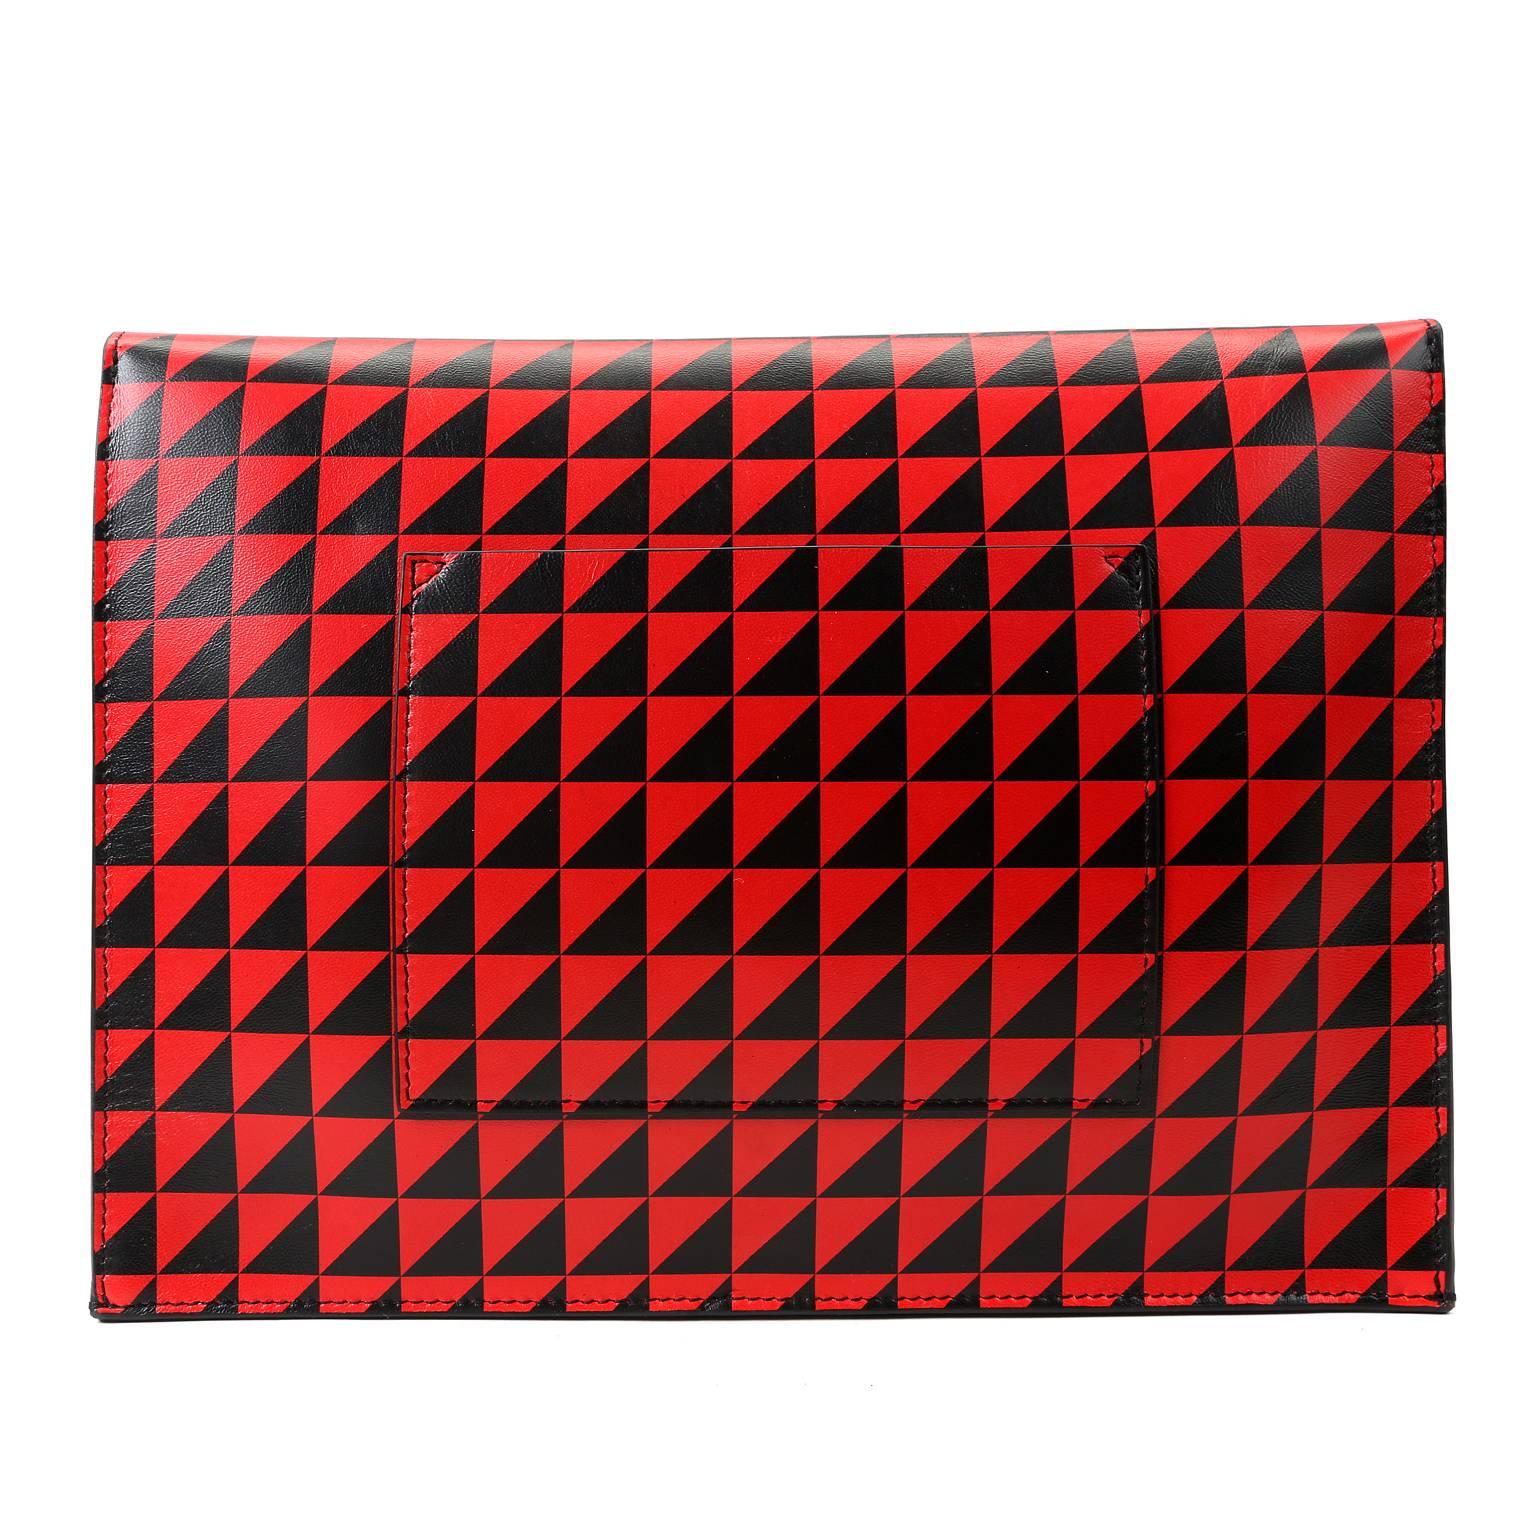 Schouler Triangle Print Large Clutch- PRISTINE
Known as the 